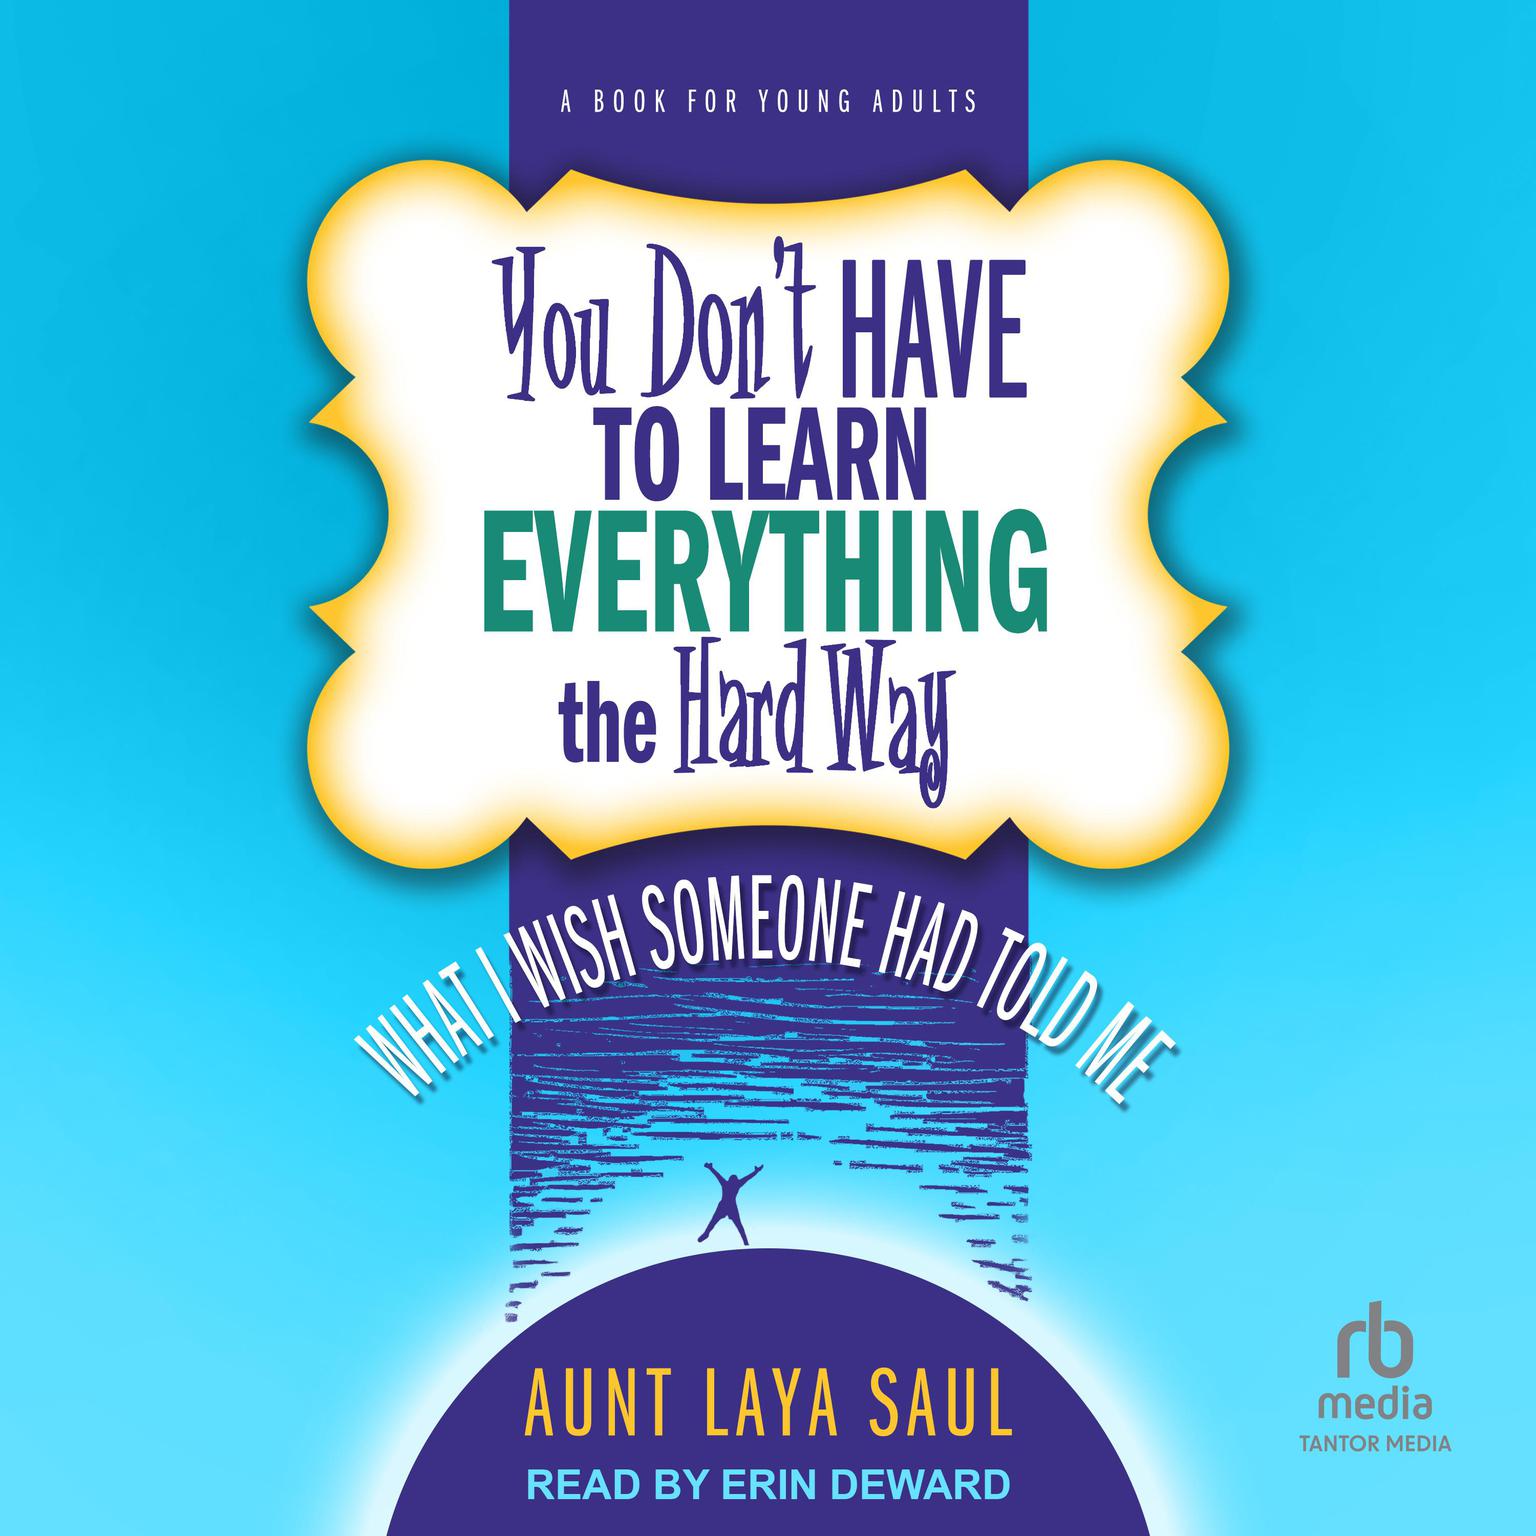 You Dont Have to Learn Everything the Hard Way: What I Wish Someone Had Told Me Audiobook, by Aunt Laya Saul